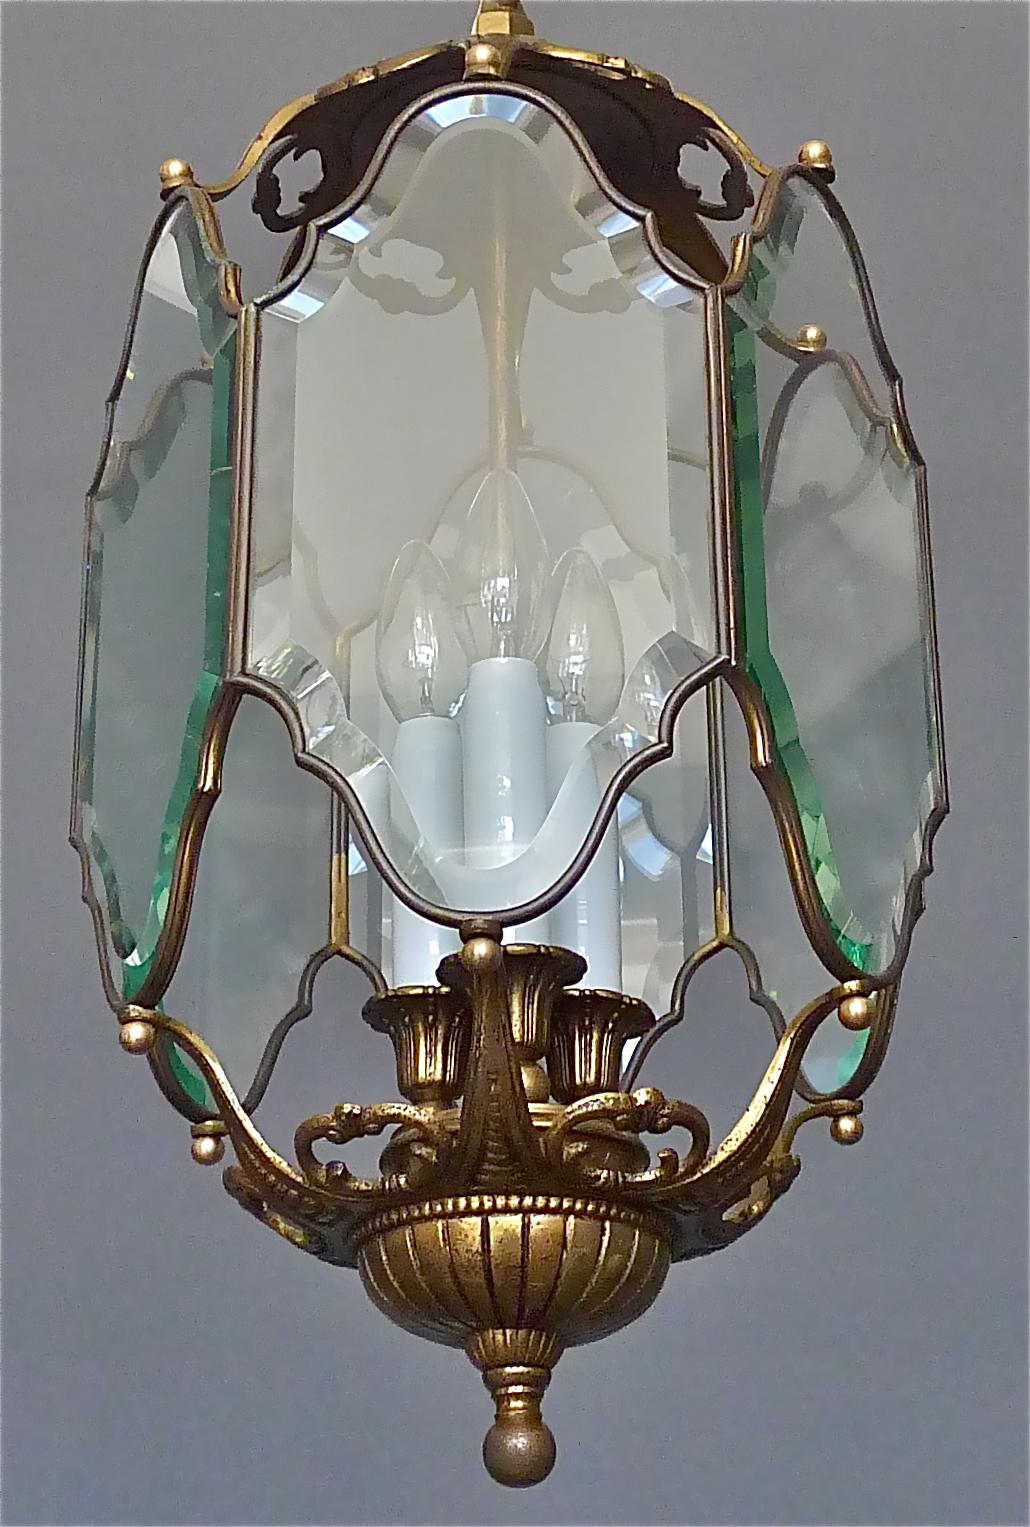 Large Antique French Lantern Lamp Faceted Crystal Glass Bronze Brass 1880 - 1900 For Sale 4